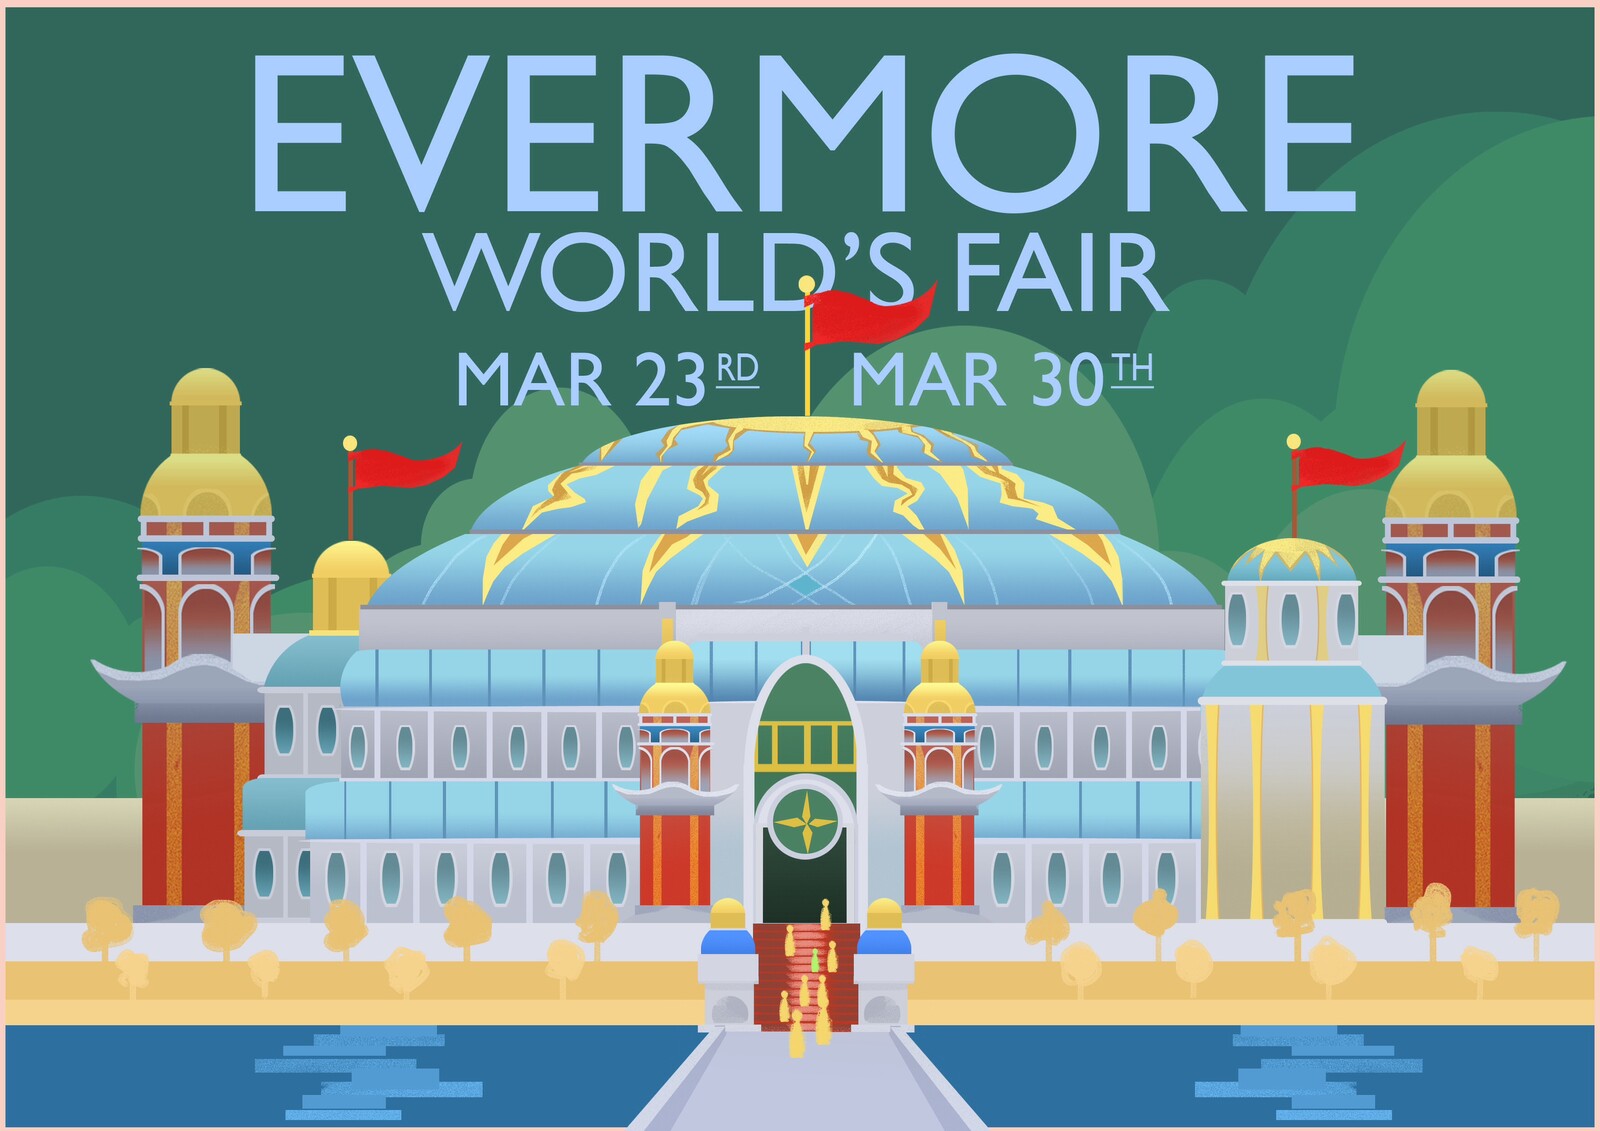 Evermore World's Fair based on Weimar Prusell's 1933 Chicago World Fair: A Century of Progress poster.